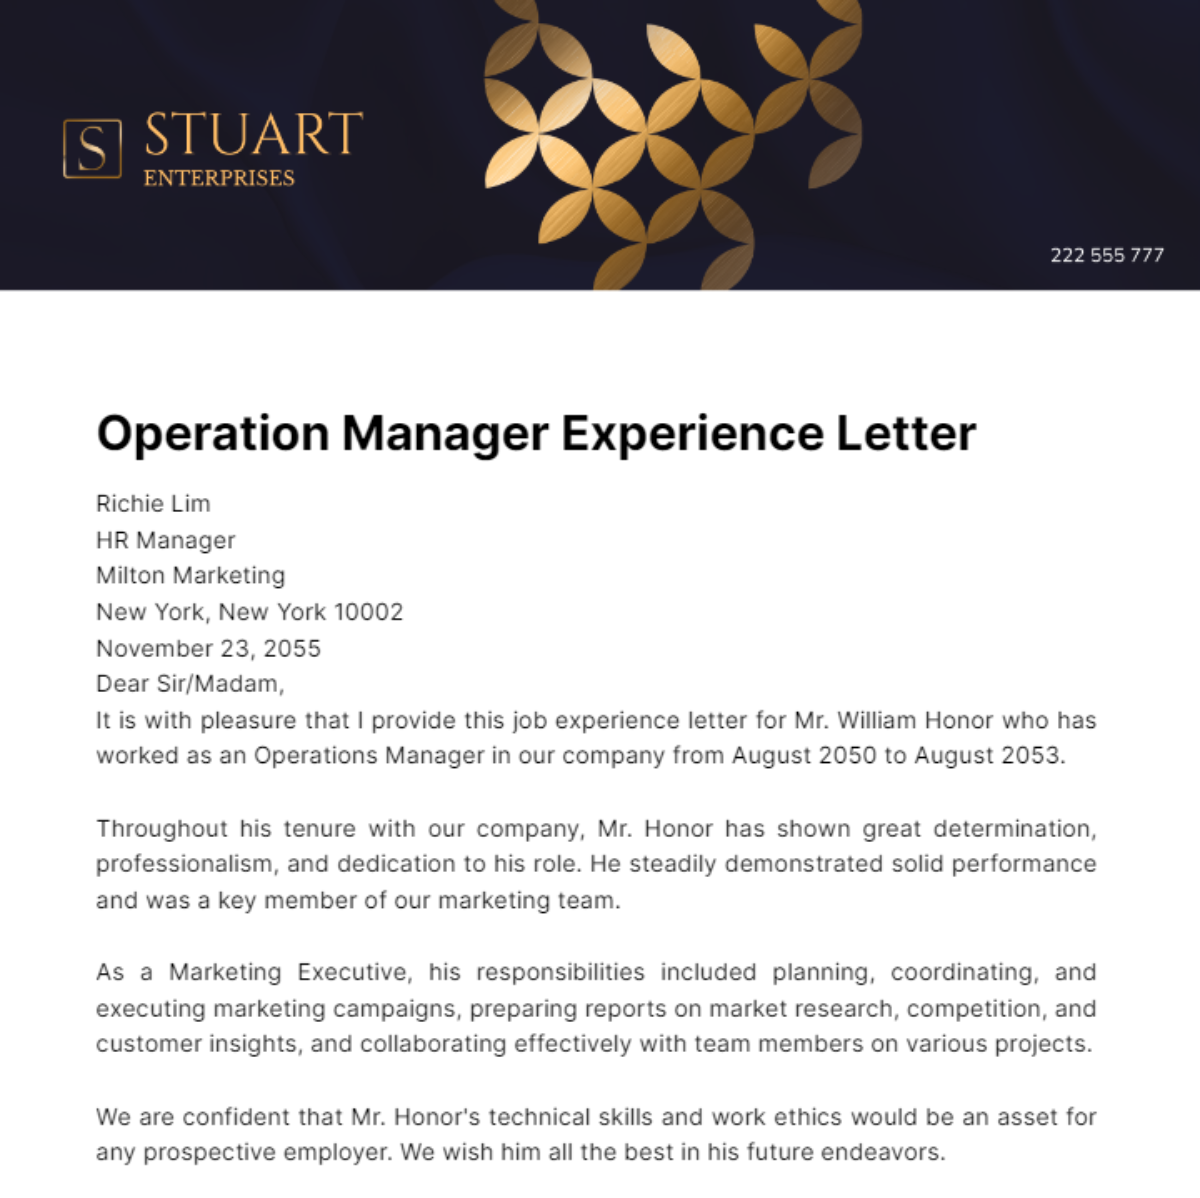 Operation Manager Experience Letter Template